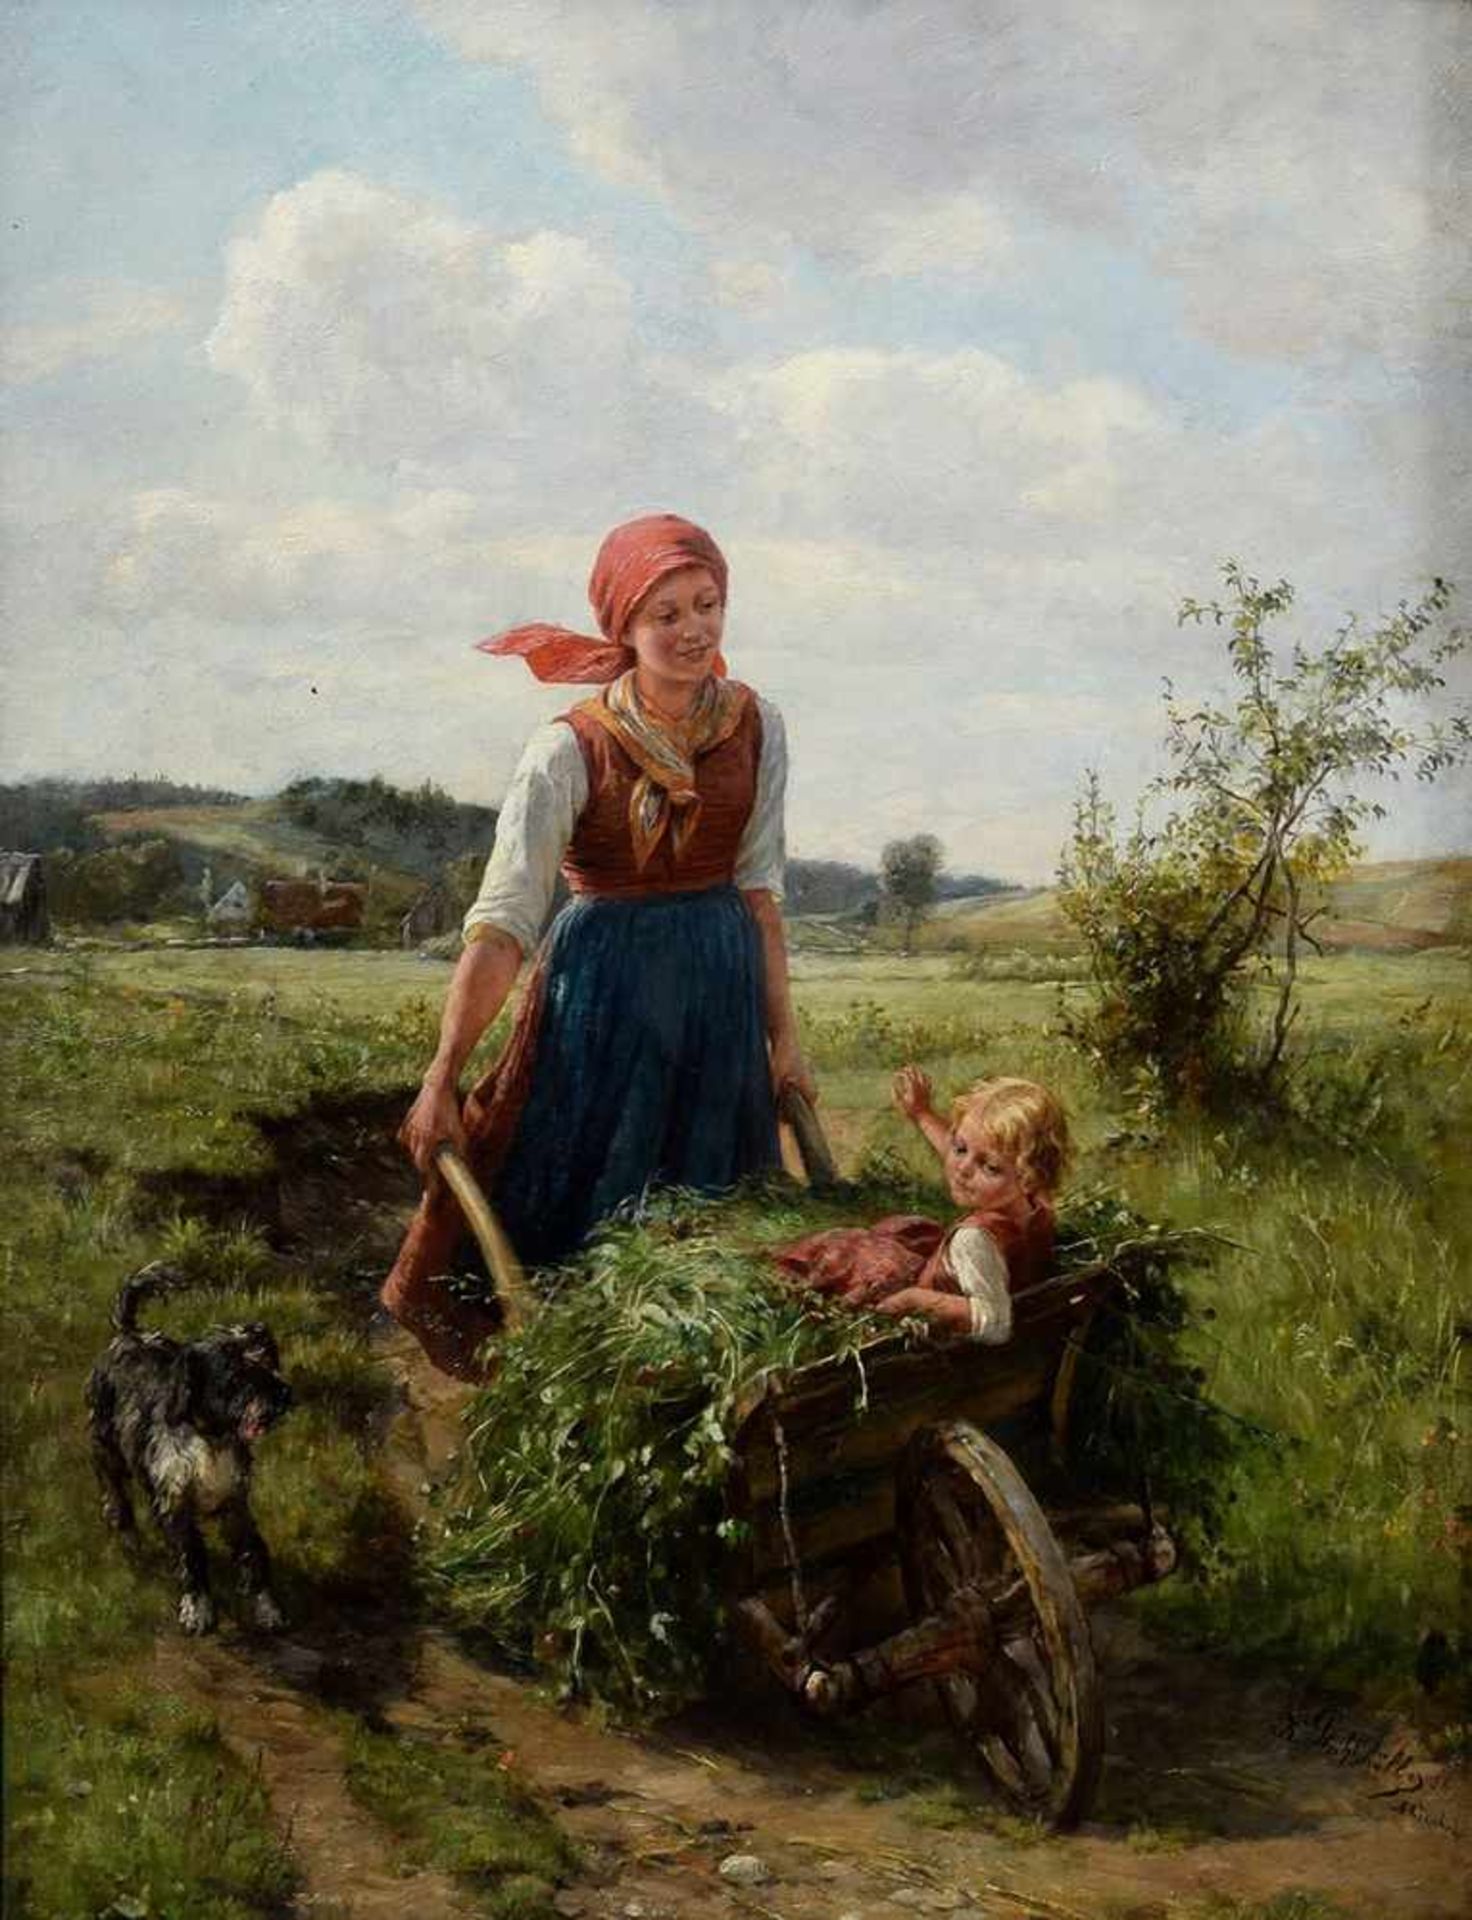 Stuhlmüller, Karl (1859-1930) "Young peasant woman with child on wheelbarrow", oil/wood, signed